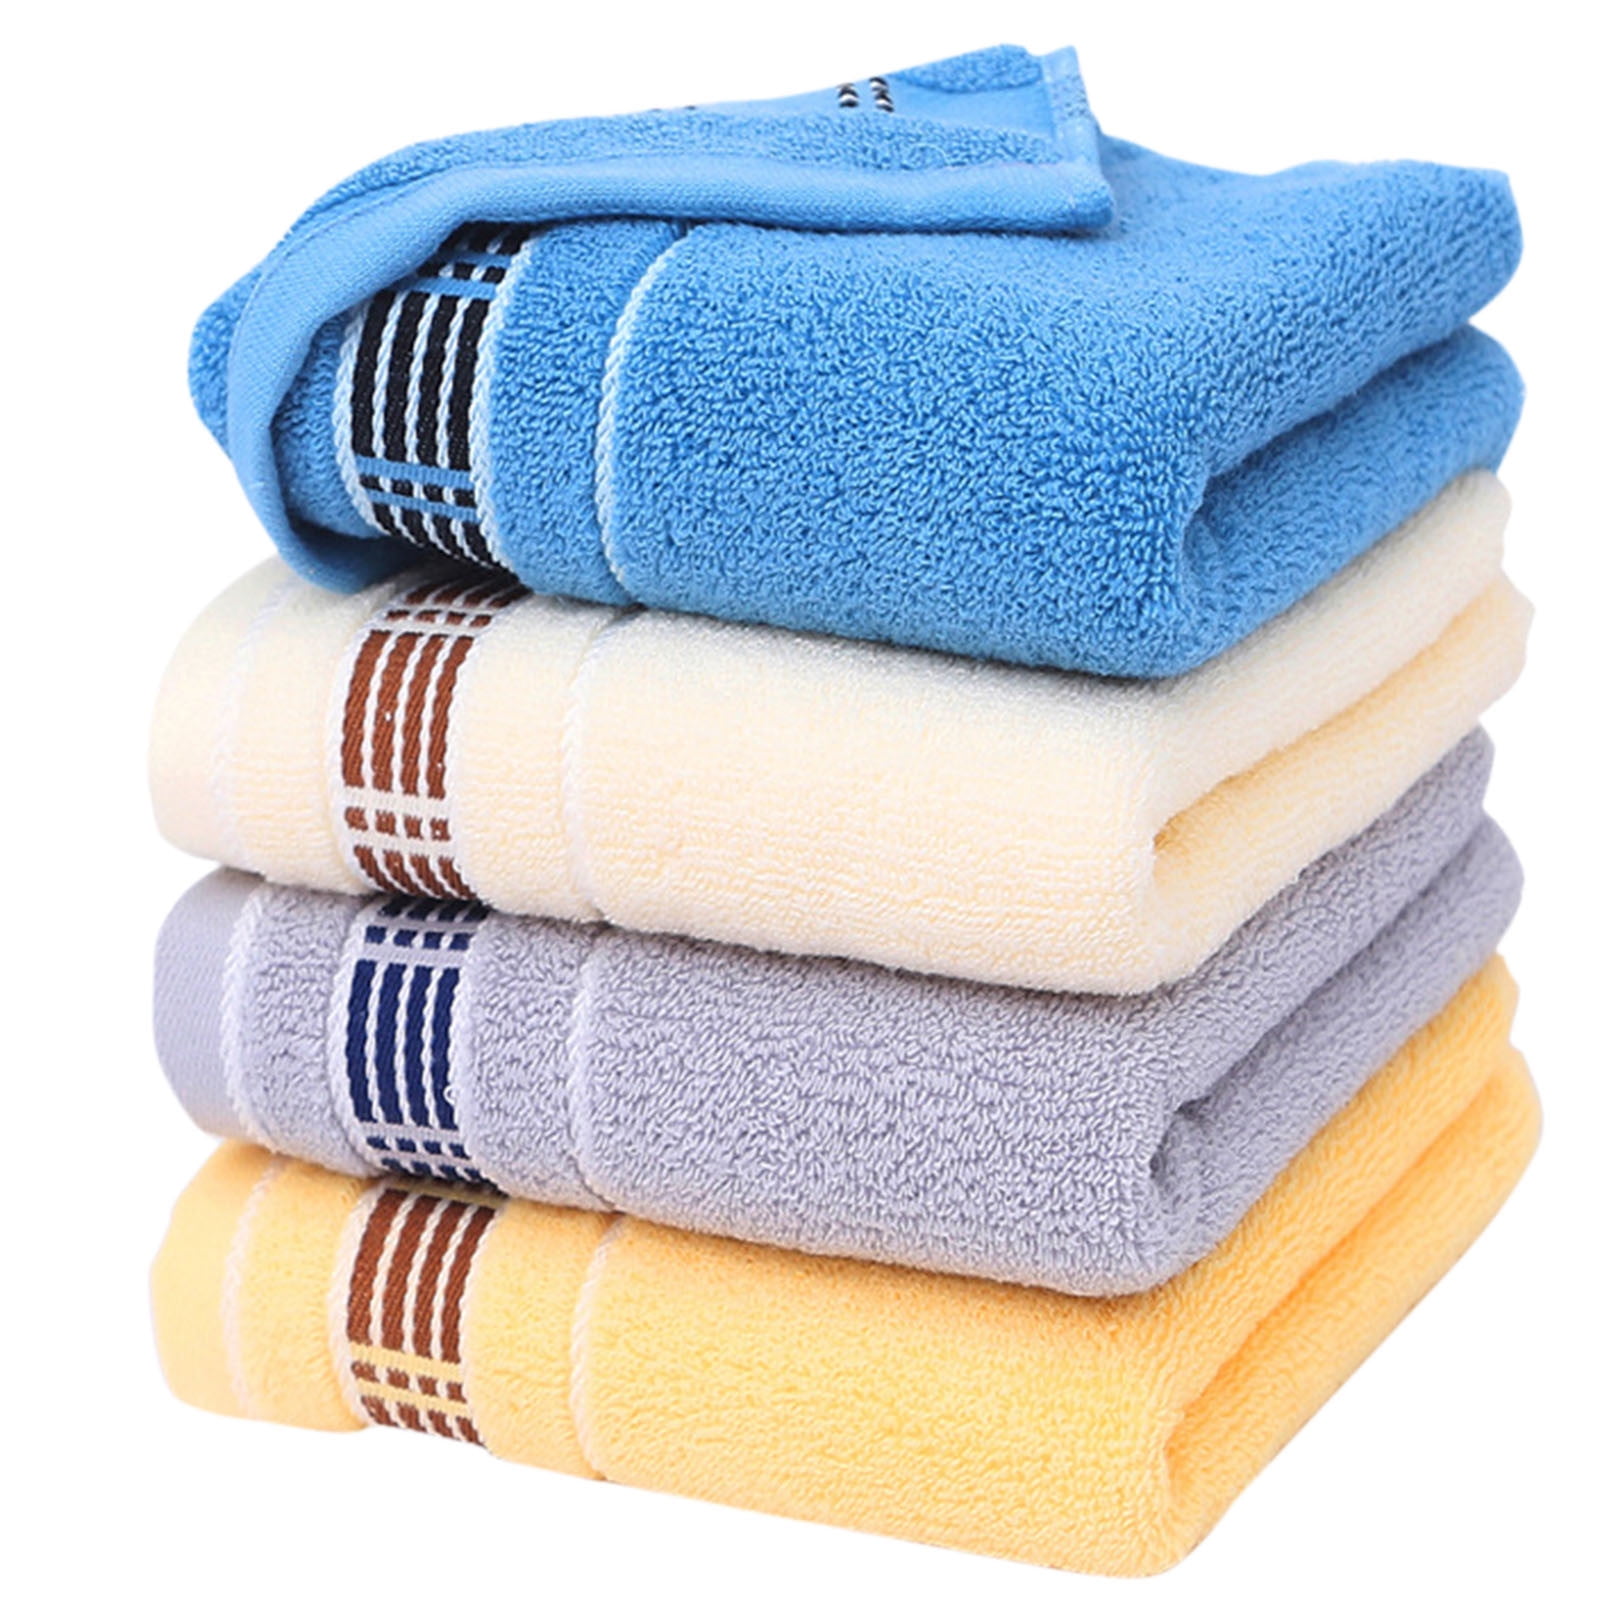 Bobasndm Thicken Towel Soft Comfortable Soft Pure Cotton Towel Super  Absorbent Cozy for Home